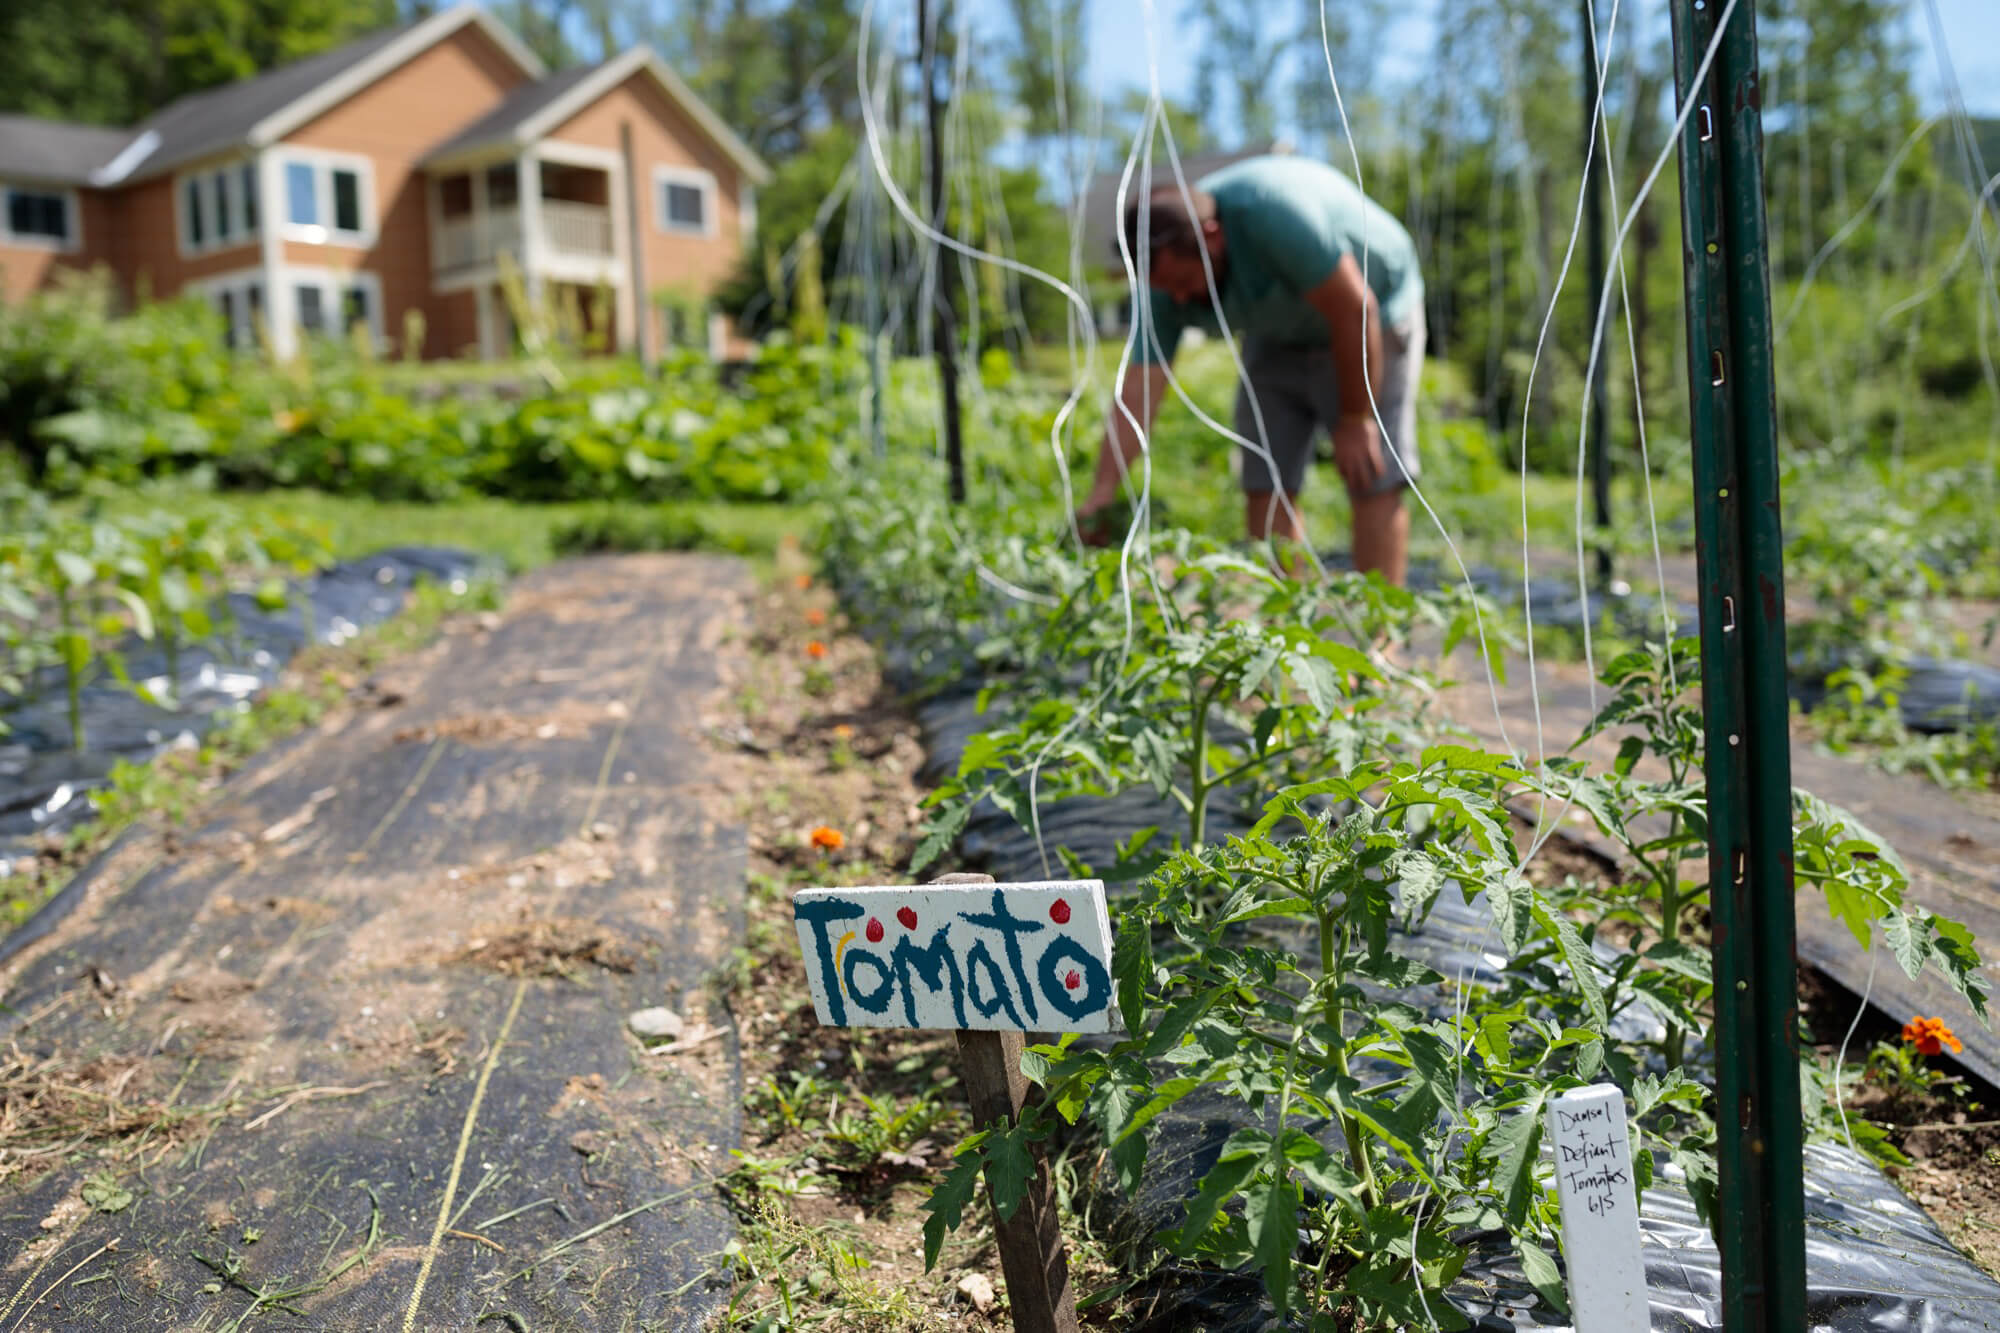 tomato sign with row of tomato starters planted